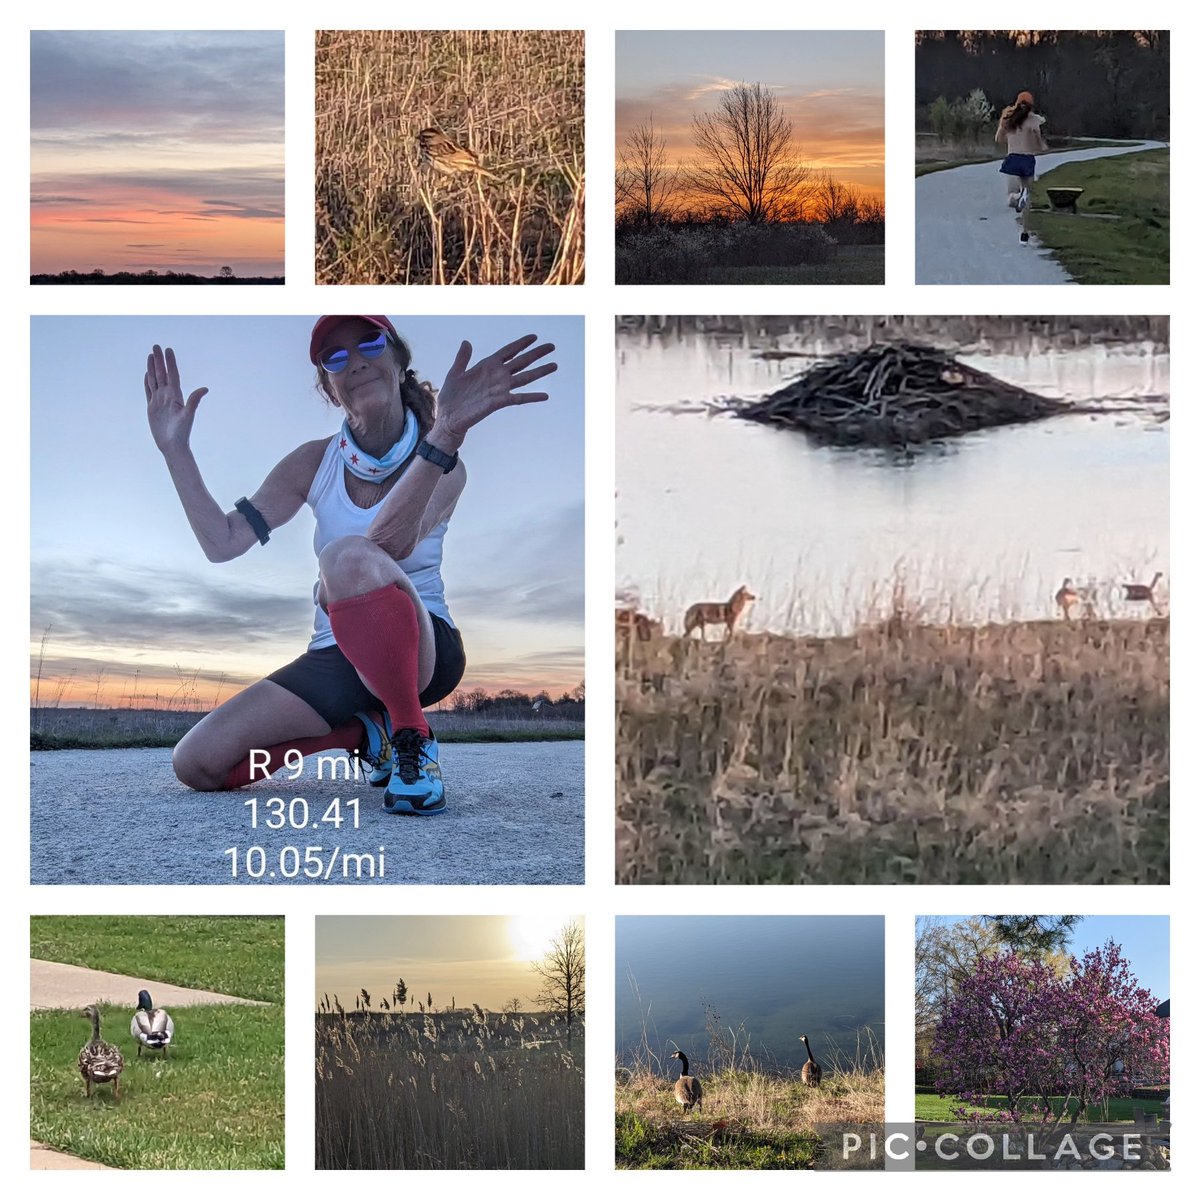 A gorgeous, sunny morning..61F, windy. Saw all kinds of wildlife: Cisco eyeing the geese, naked shirt guy & cool bird. Run was tough with a few quick stops. Endurance is still lagging. Happy Sunday. Good luck to anyone racing today. @runningpunks #goodr #squirrelsnutbut